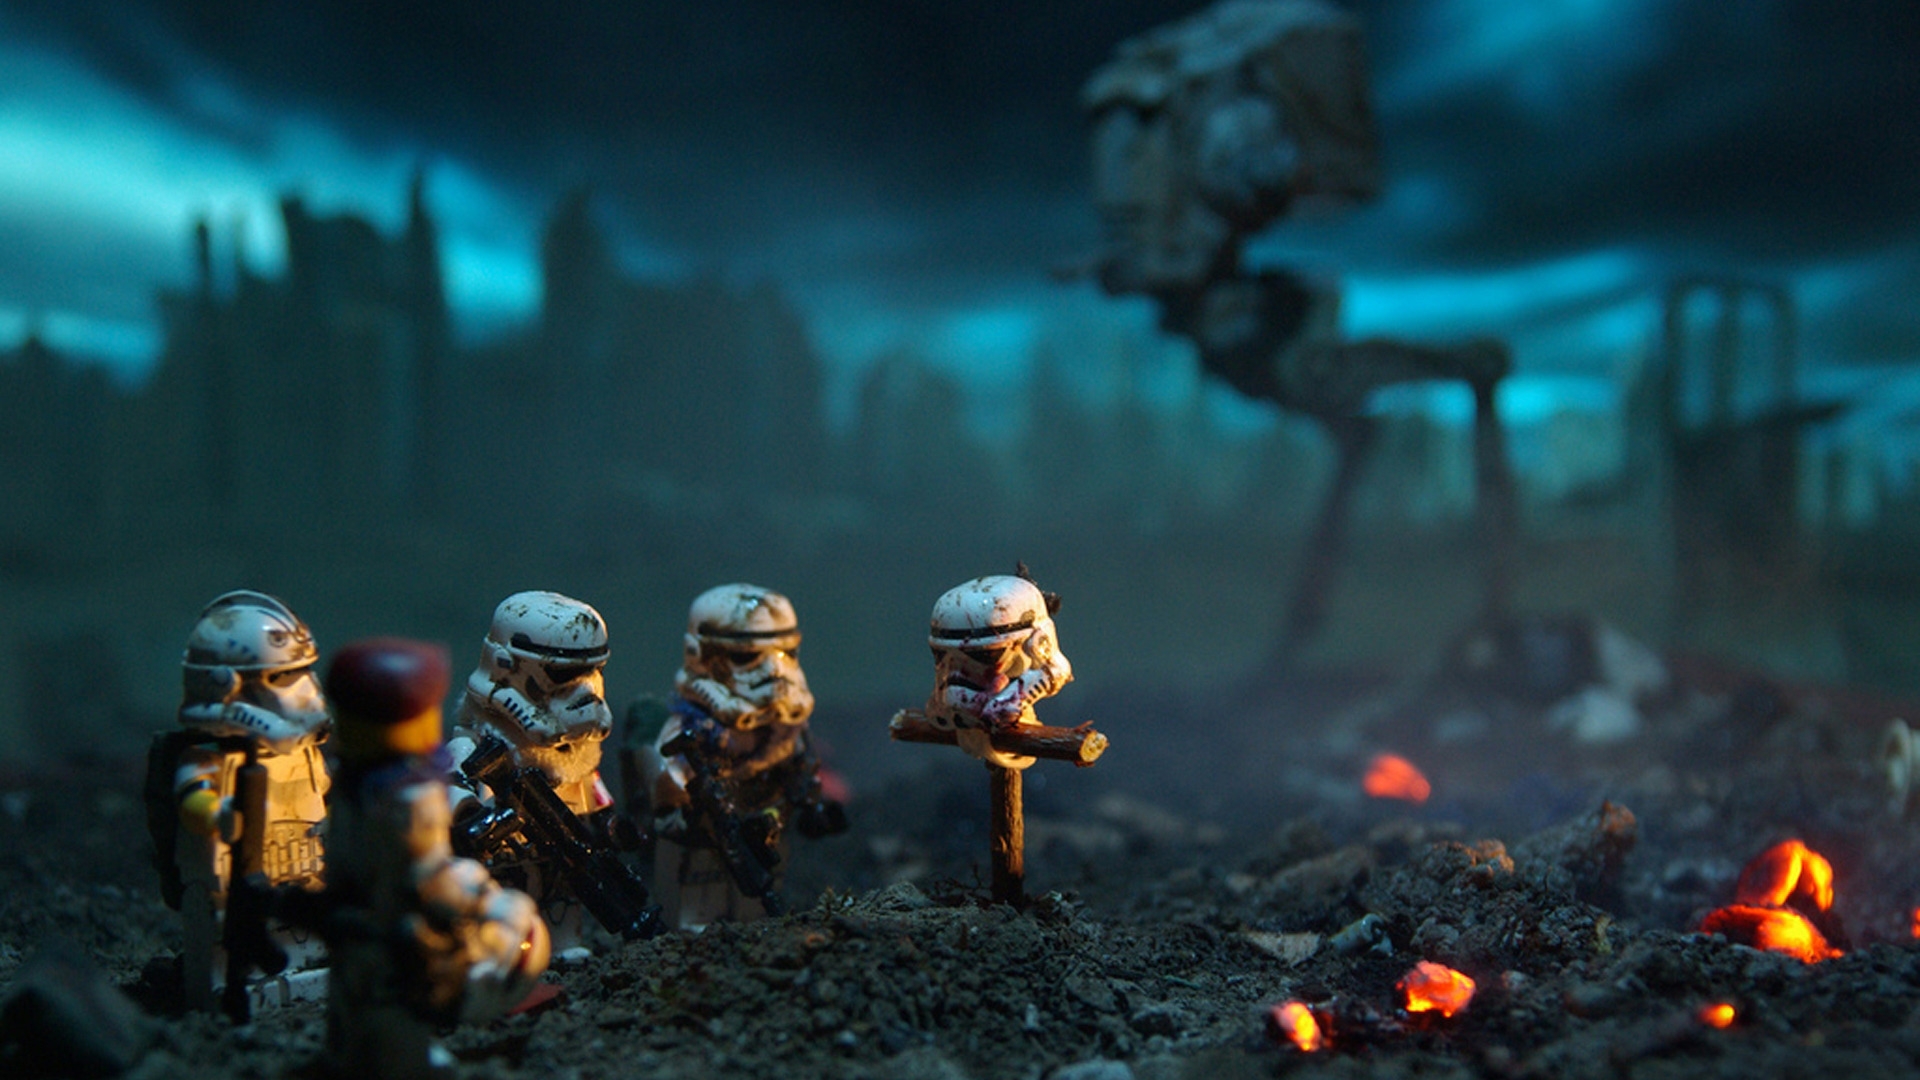 Star Wars Lego Soldiers for 1920 x 1080 HDTV 1080p resolution